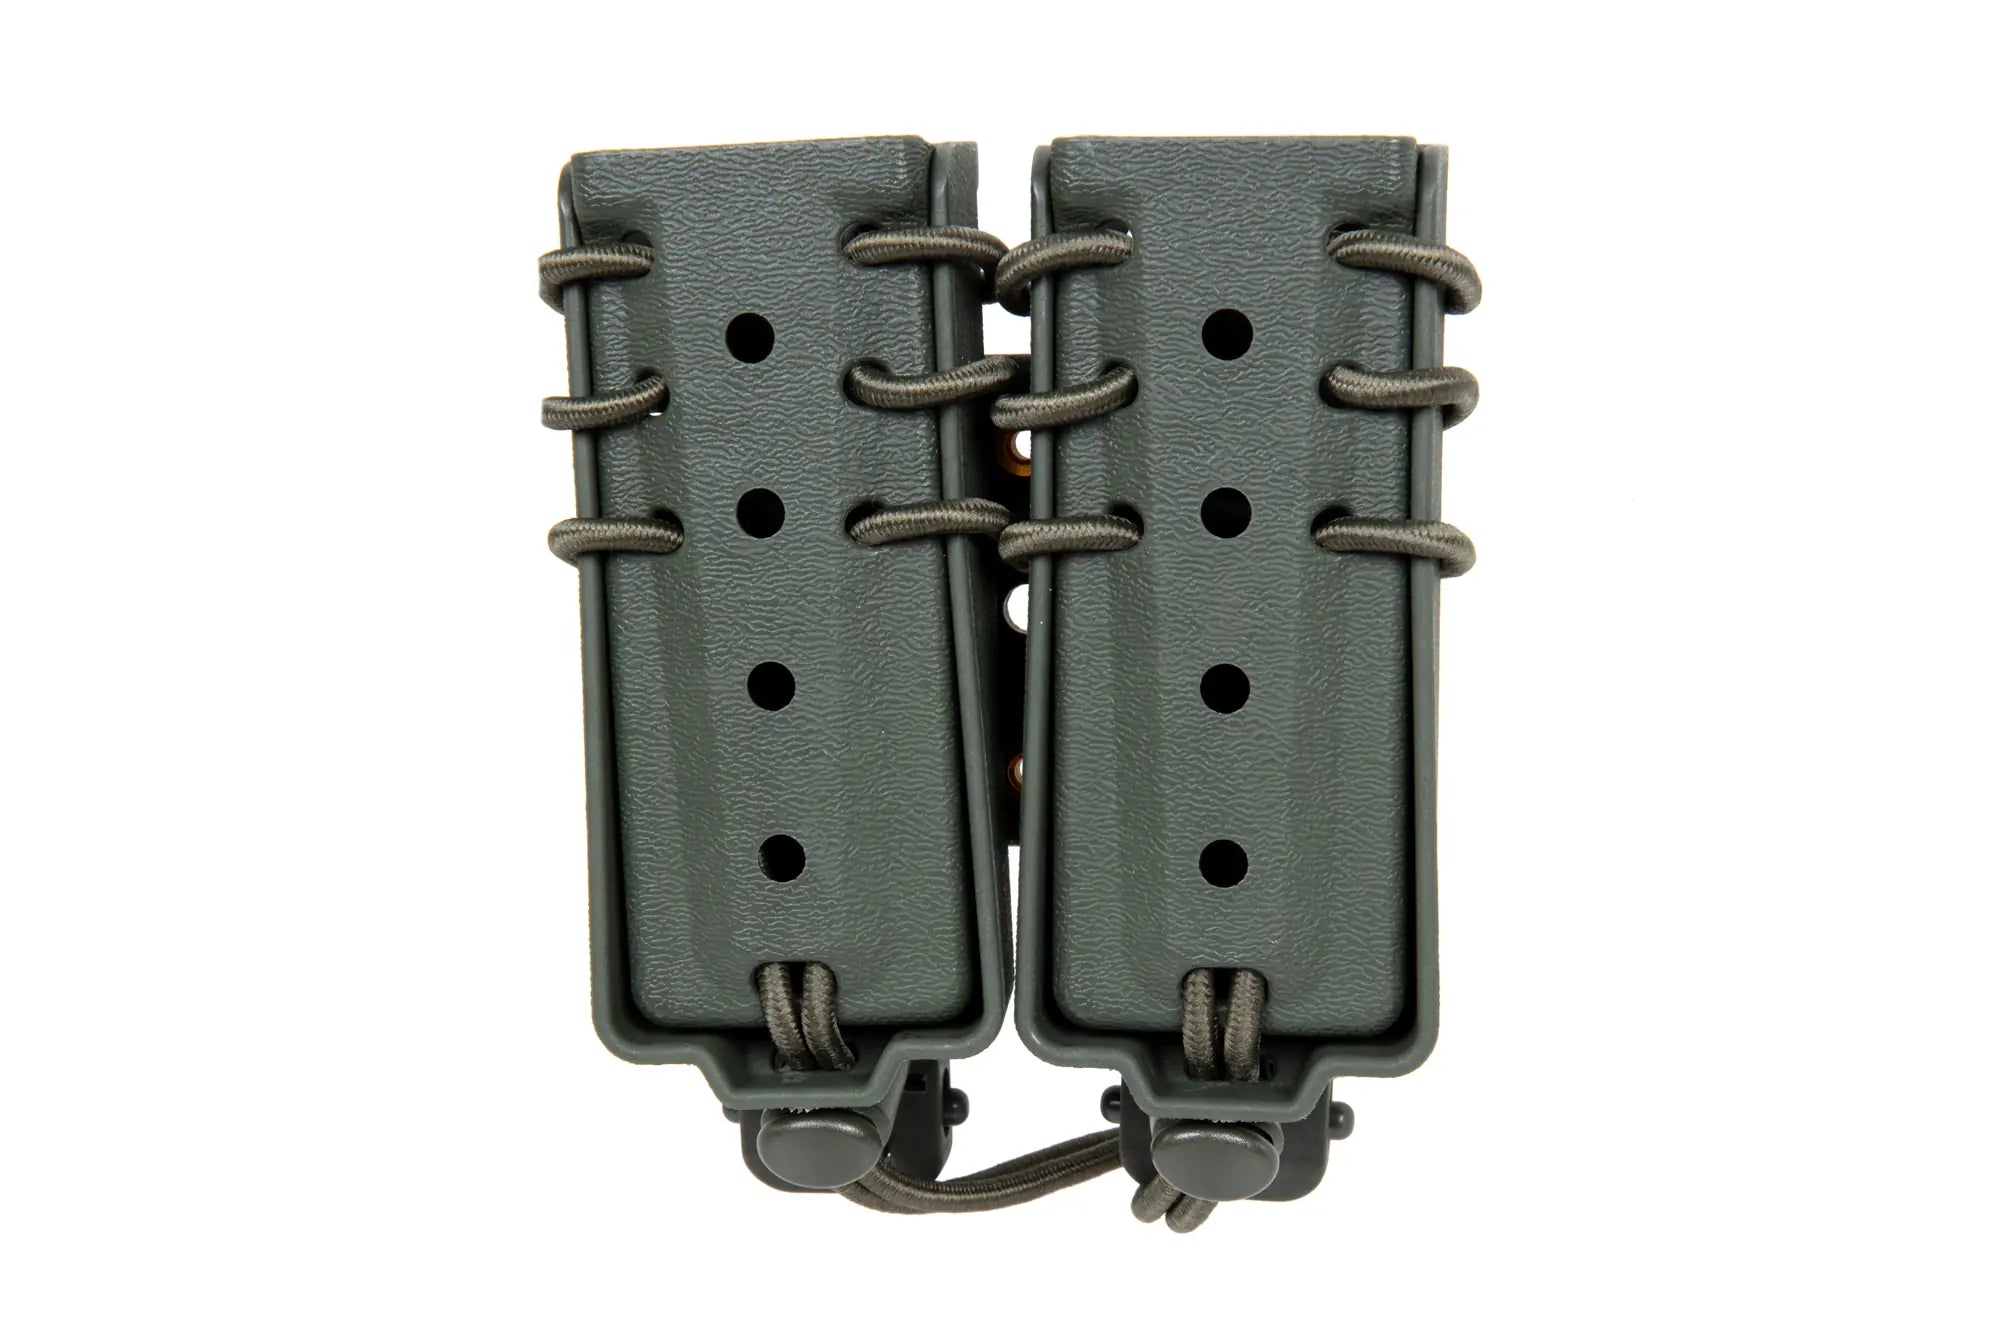 Carrier for 2 9mm magazines Wosport Urban Assault Long Quick Pull Olive